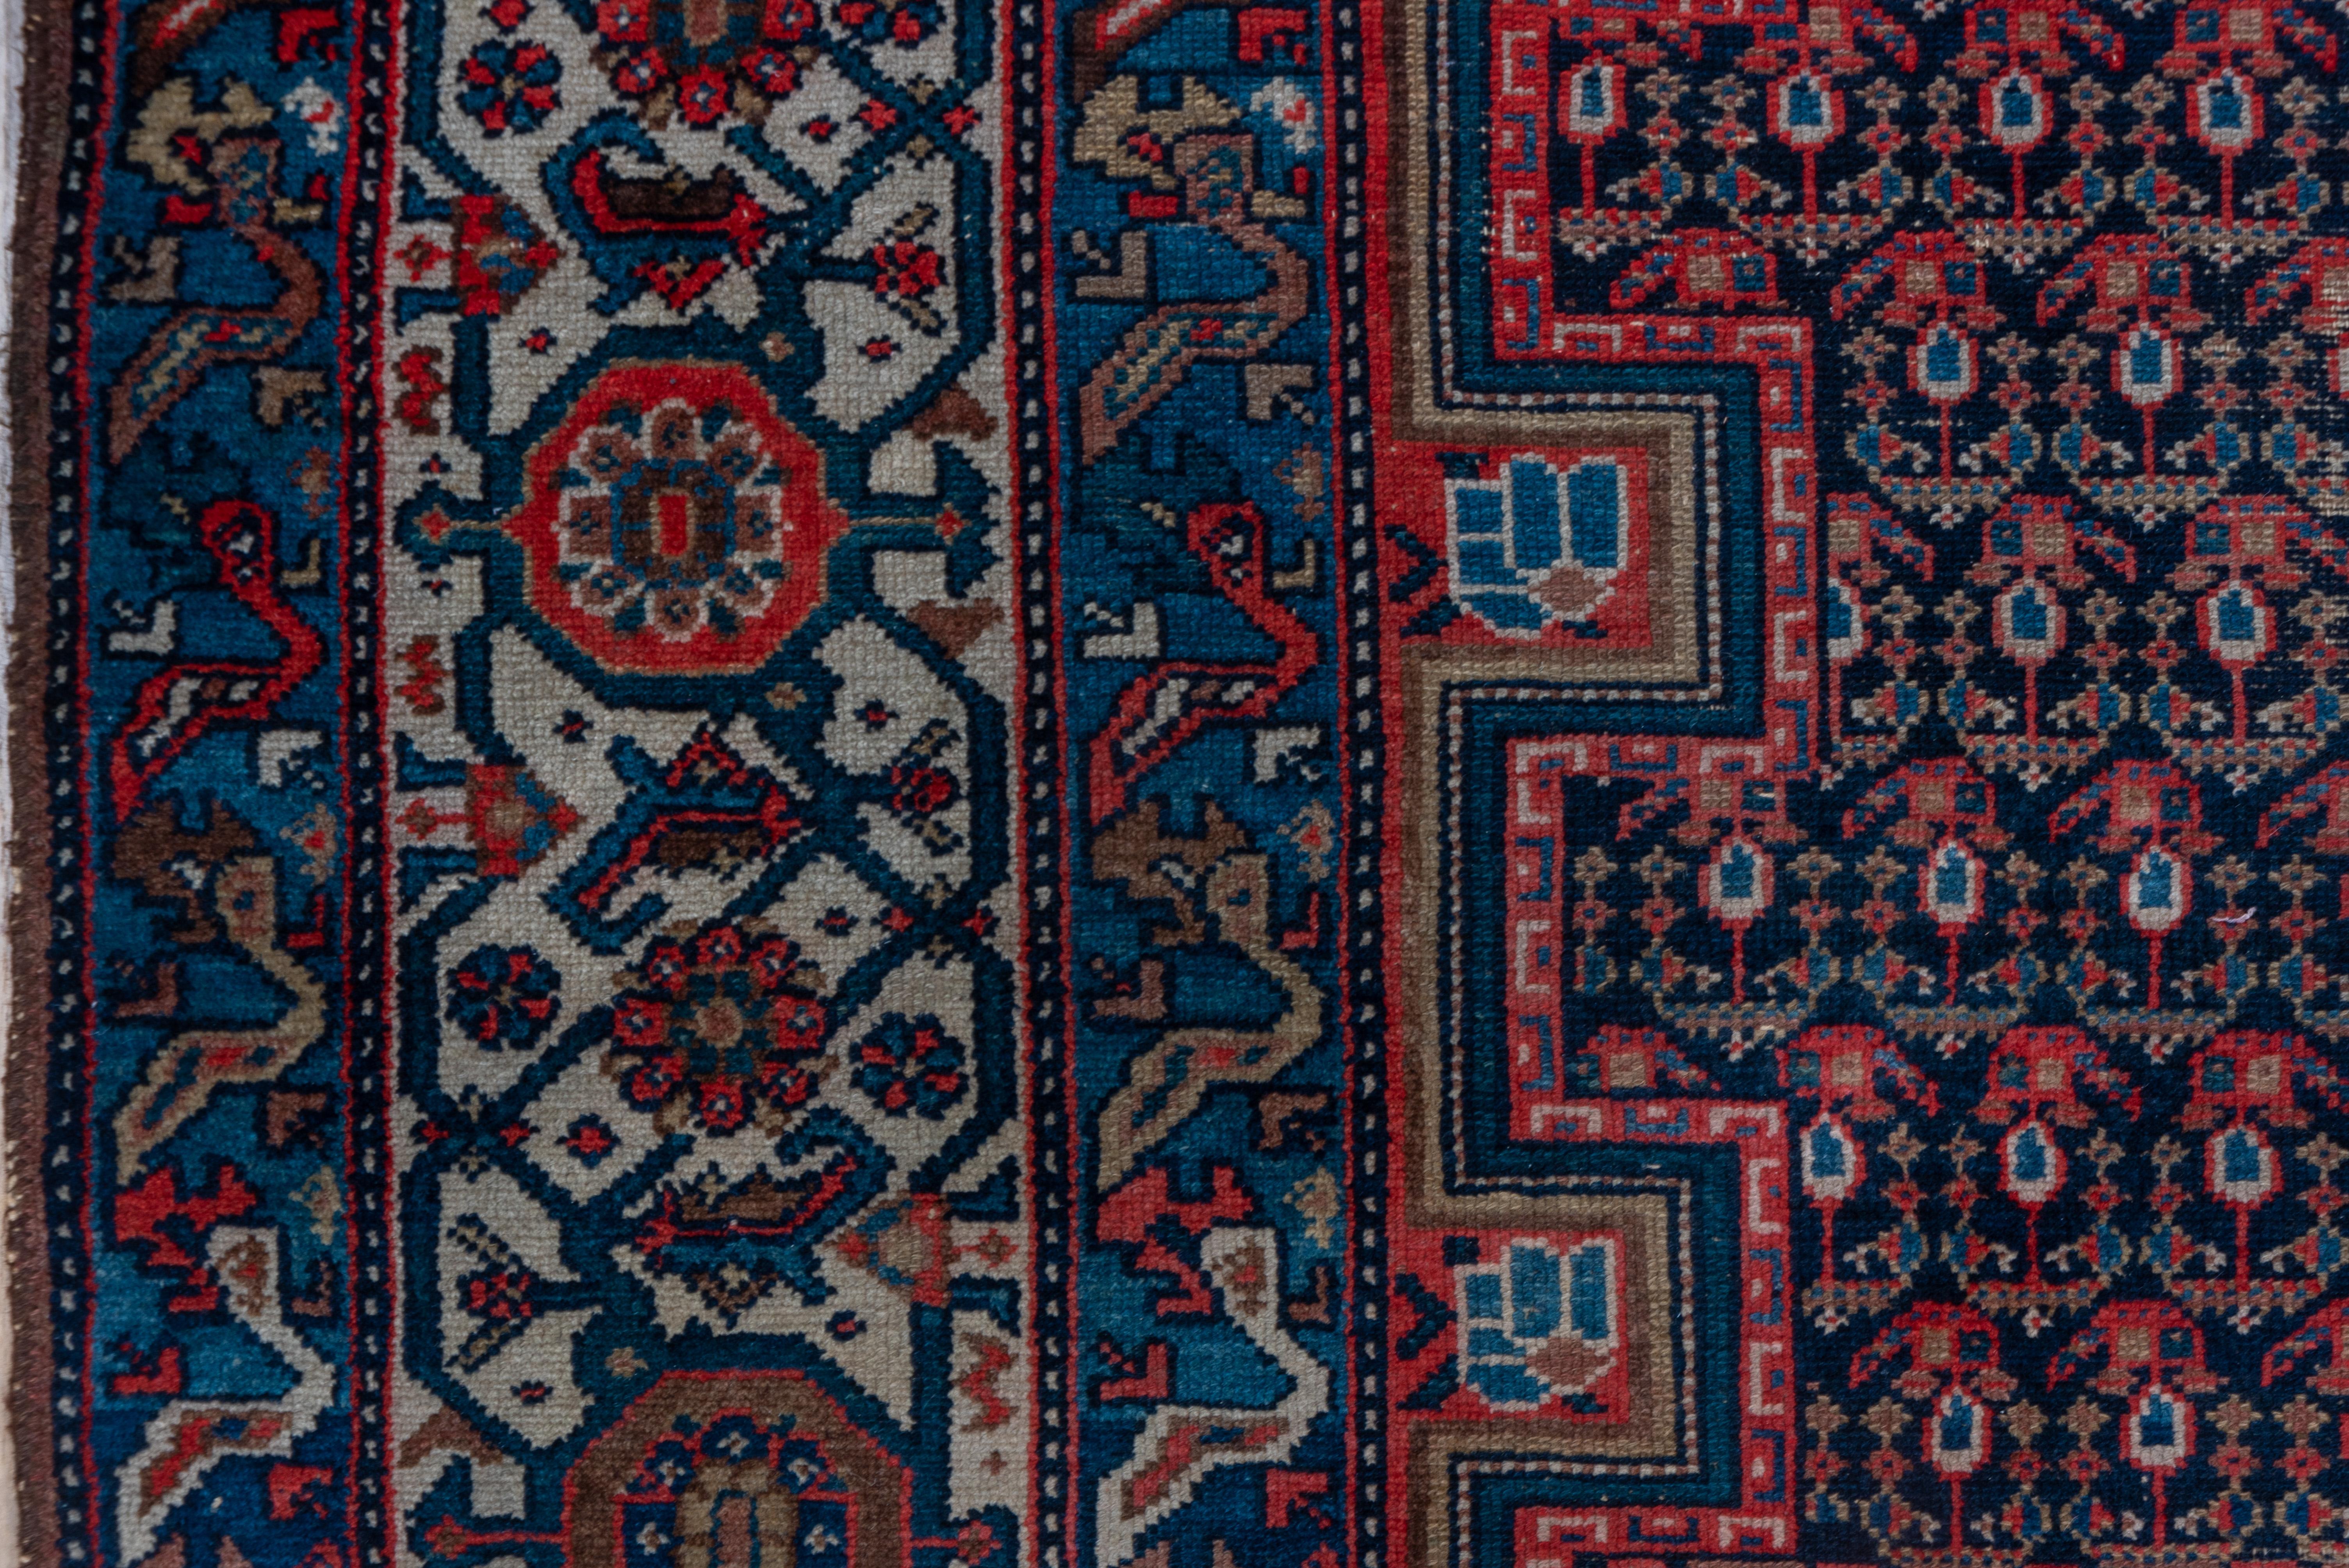 Wool Shabby Chic Antique Persian Malayer Gallery Rug, Navy & Light Red Paisley Field